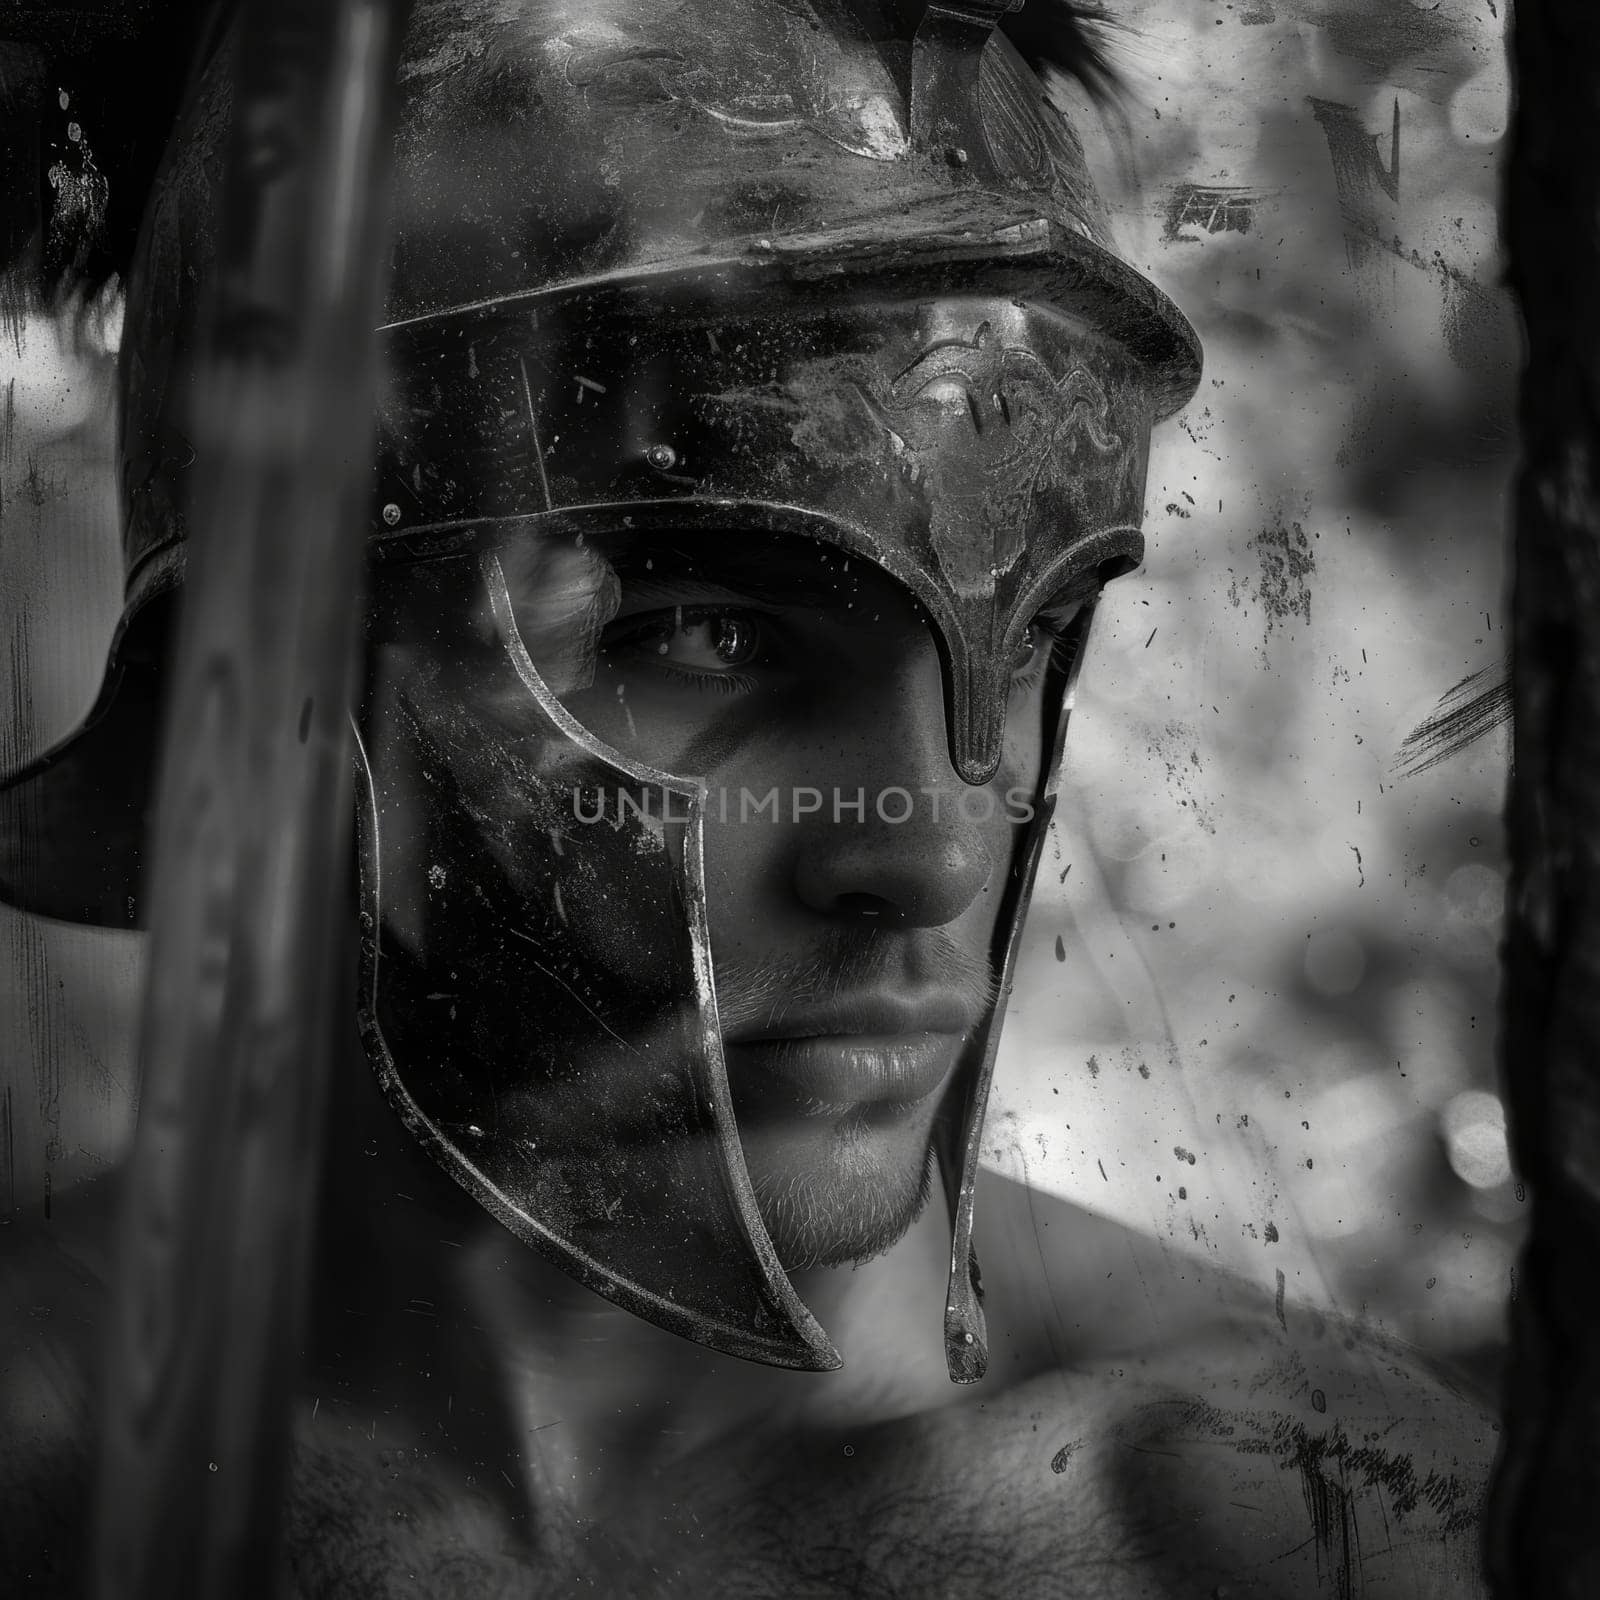 An ancient Greek warrior or gladiator. Black and white photo by Lobachad